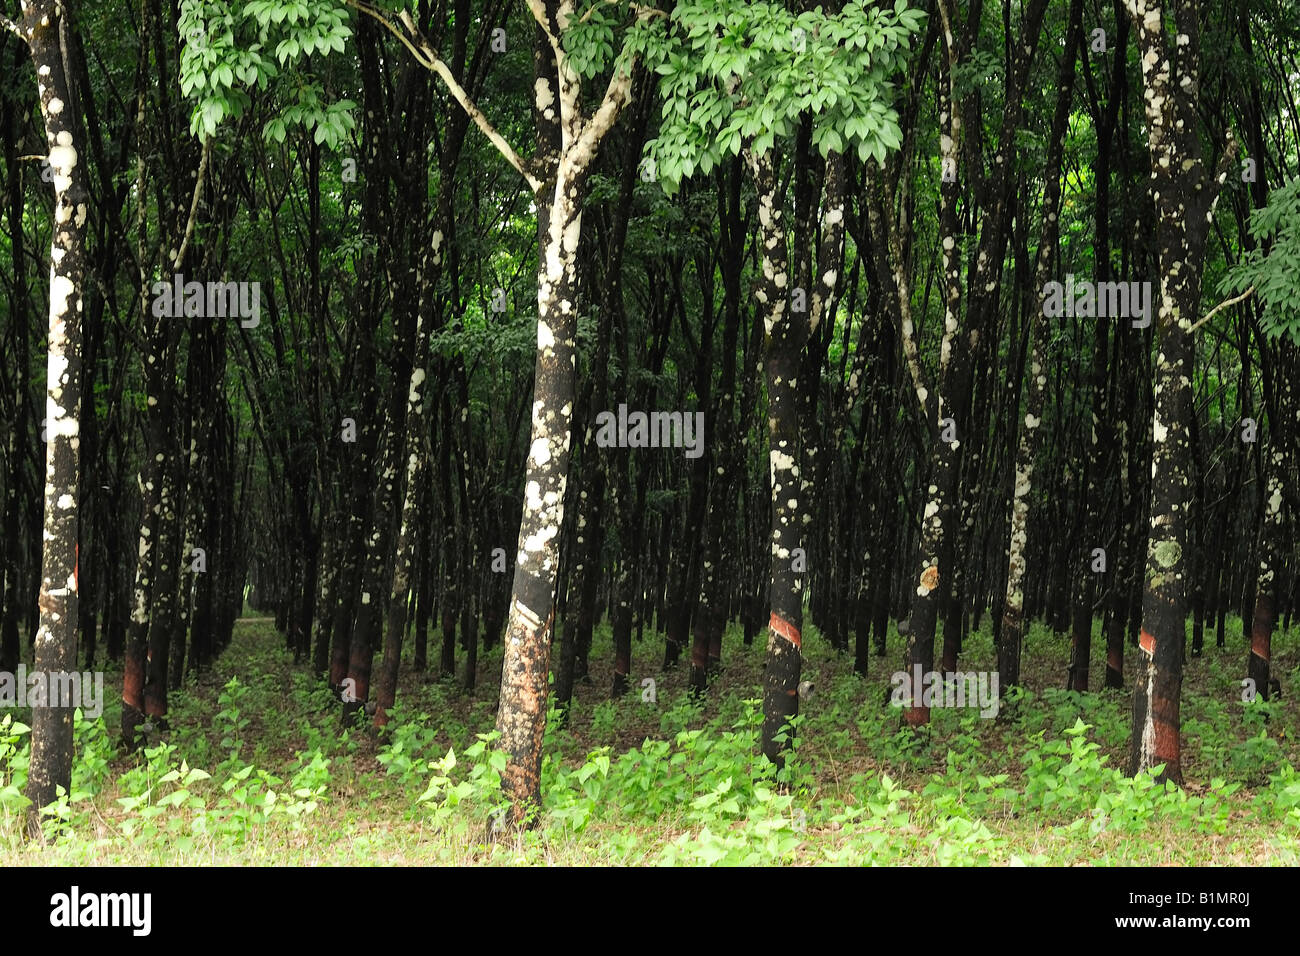 Trees in a rubber plantation in south east Asia Stock Photo